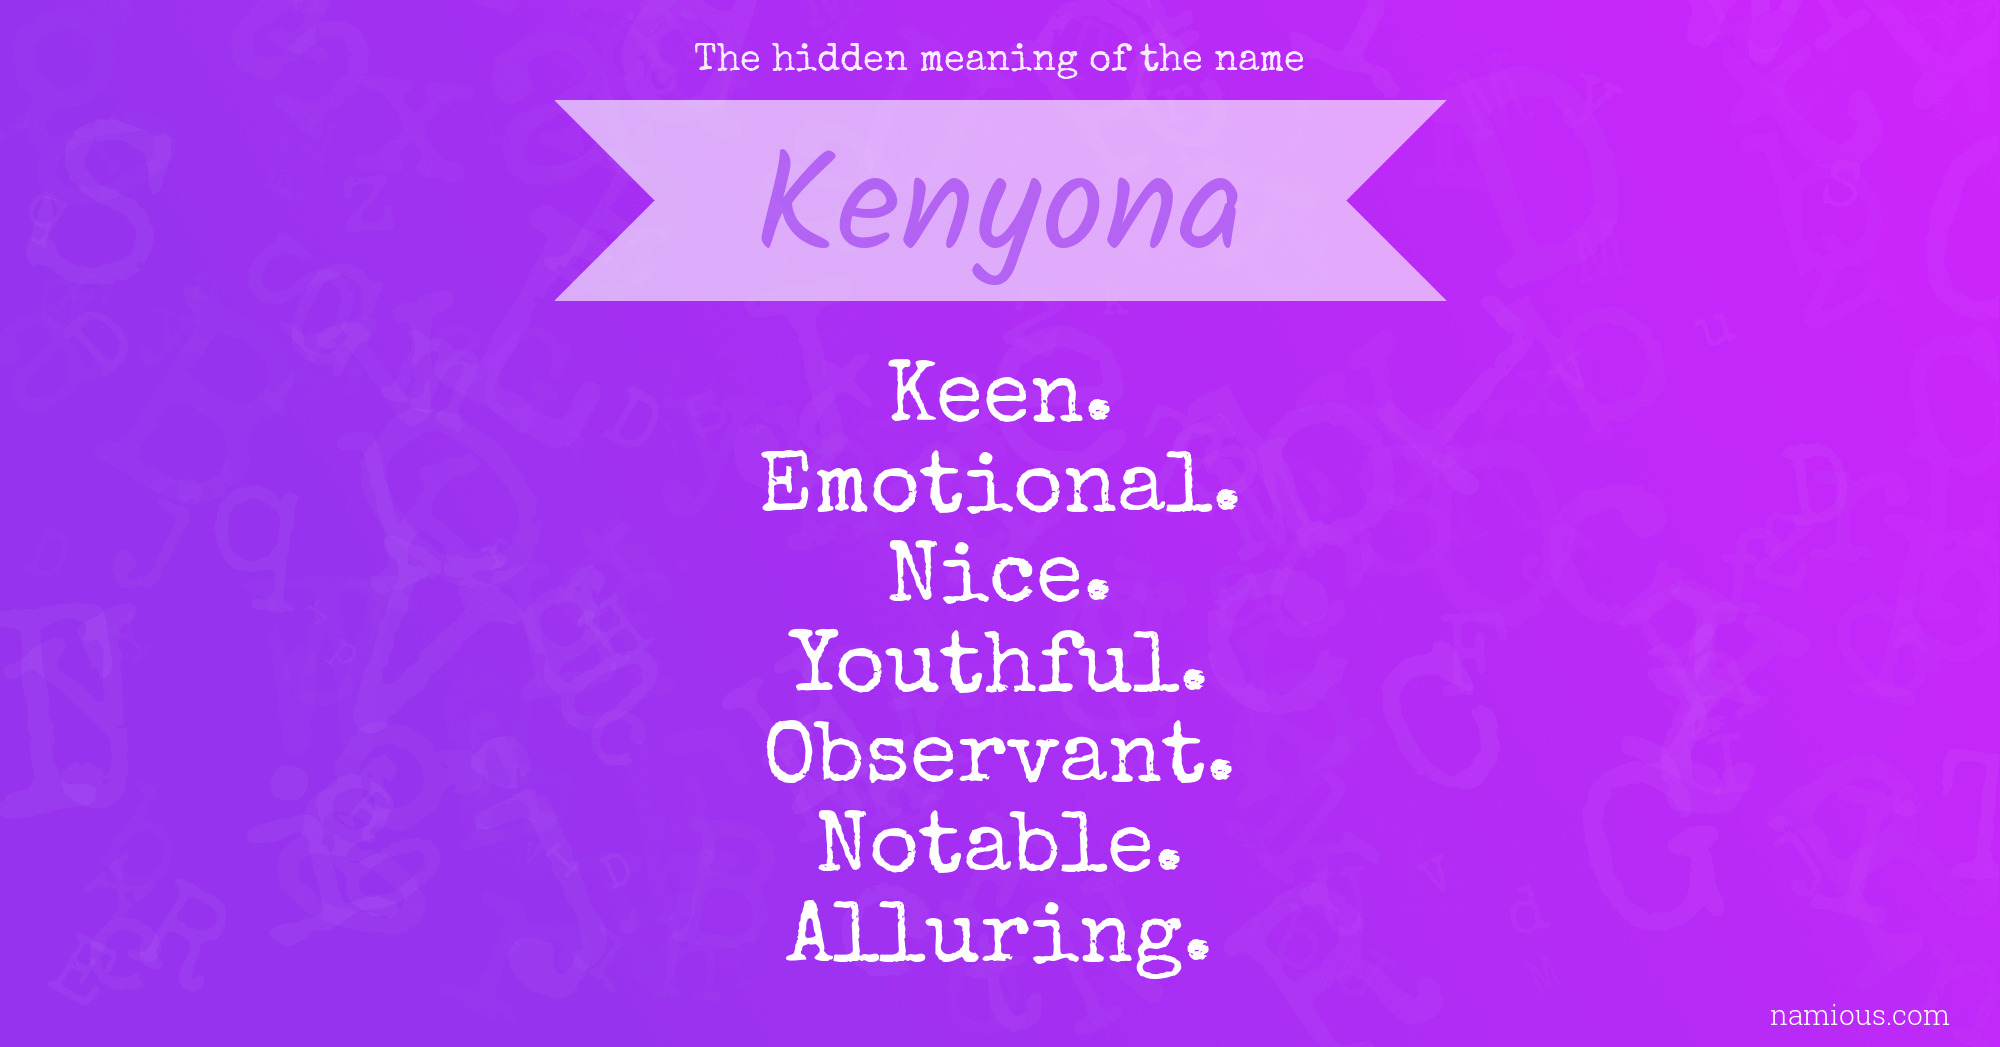 The hidden meaning of the name Kenyona